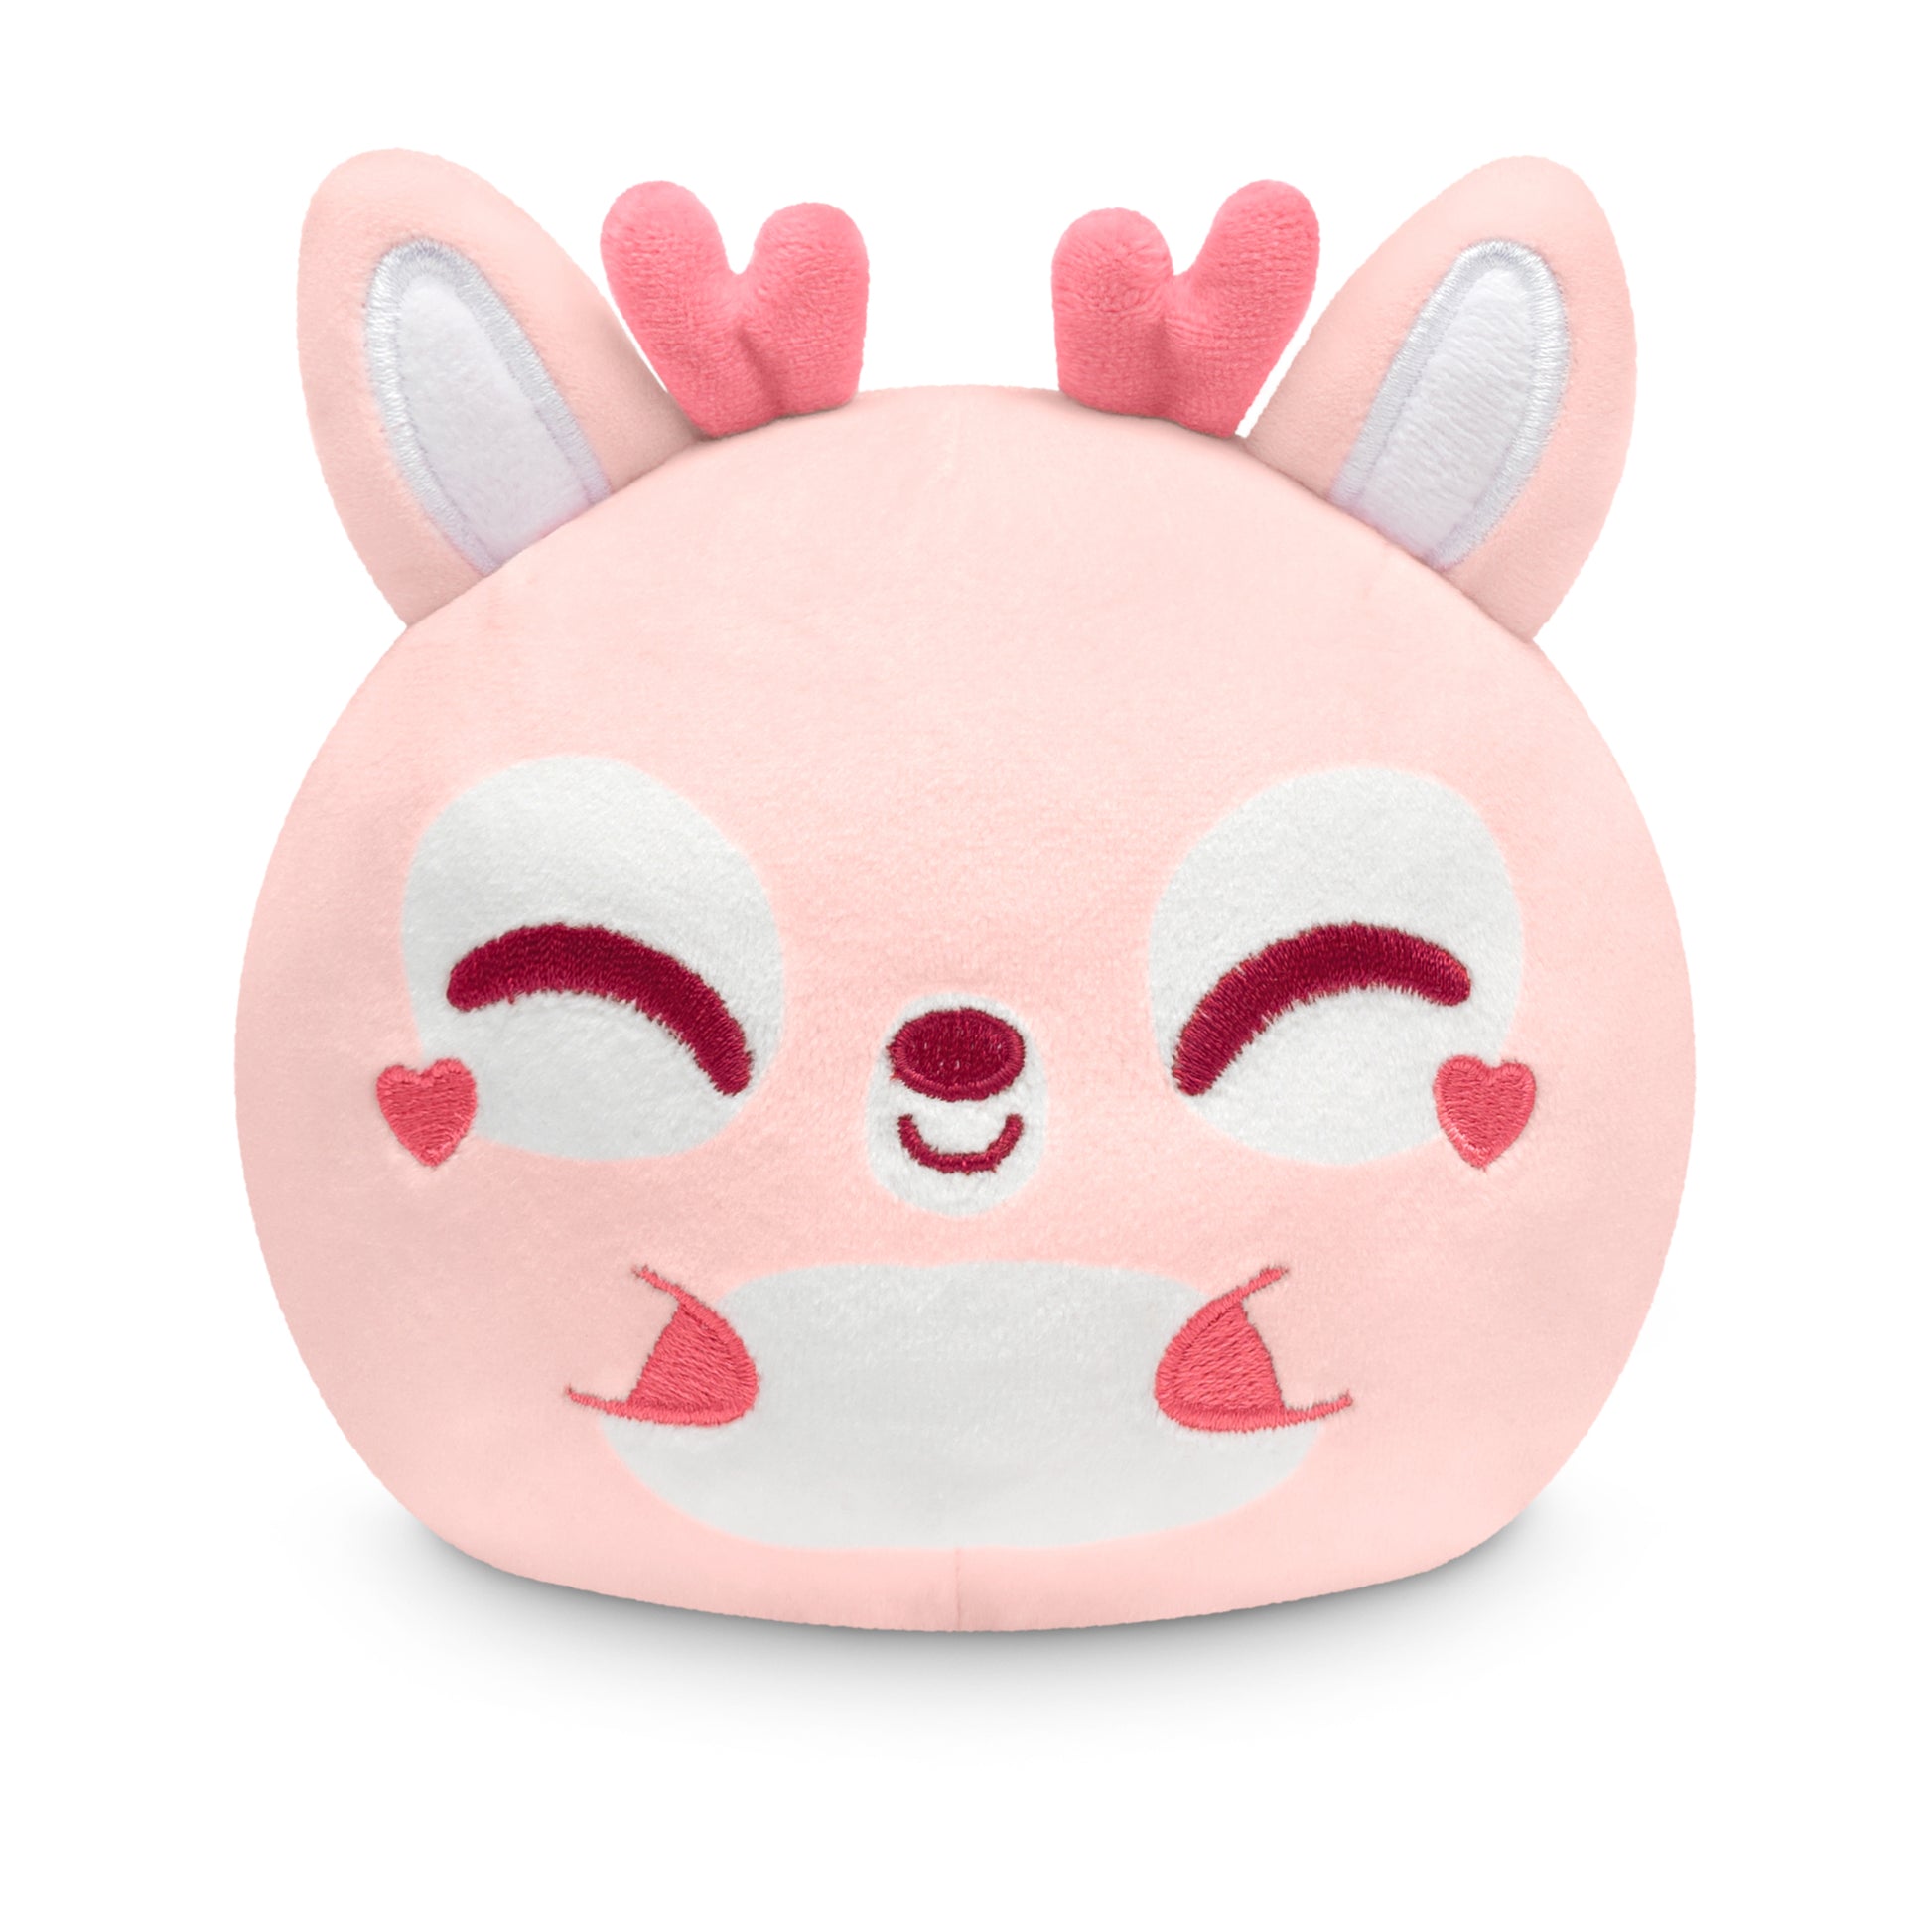 A TeeTurtle Deer-est Love 4" Reversible Plushie from the Valentine's Day collection, featuring a pink stuffed toy adorned with a heart.